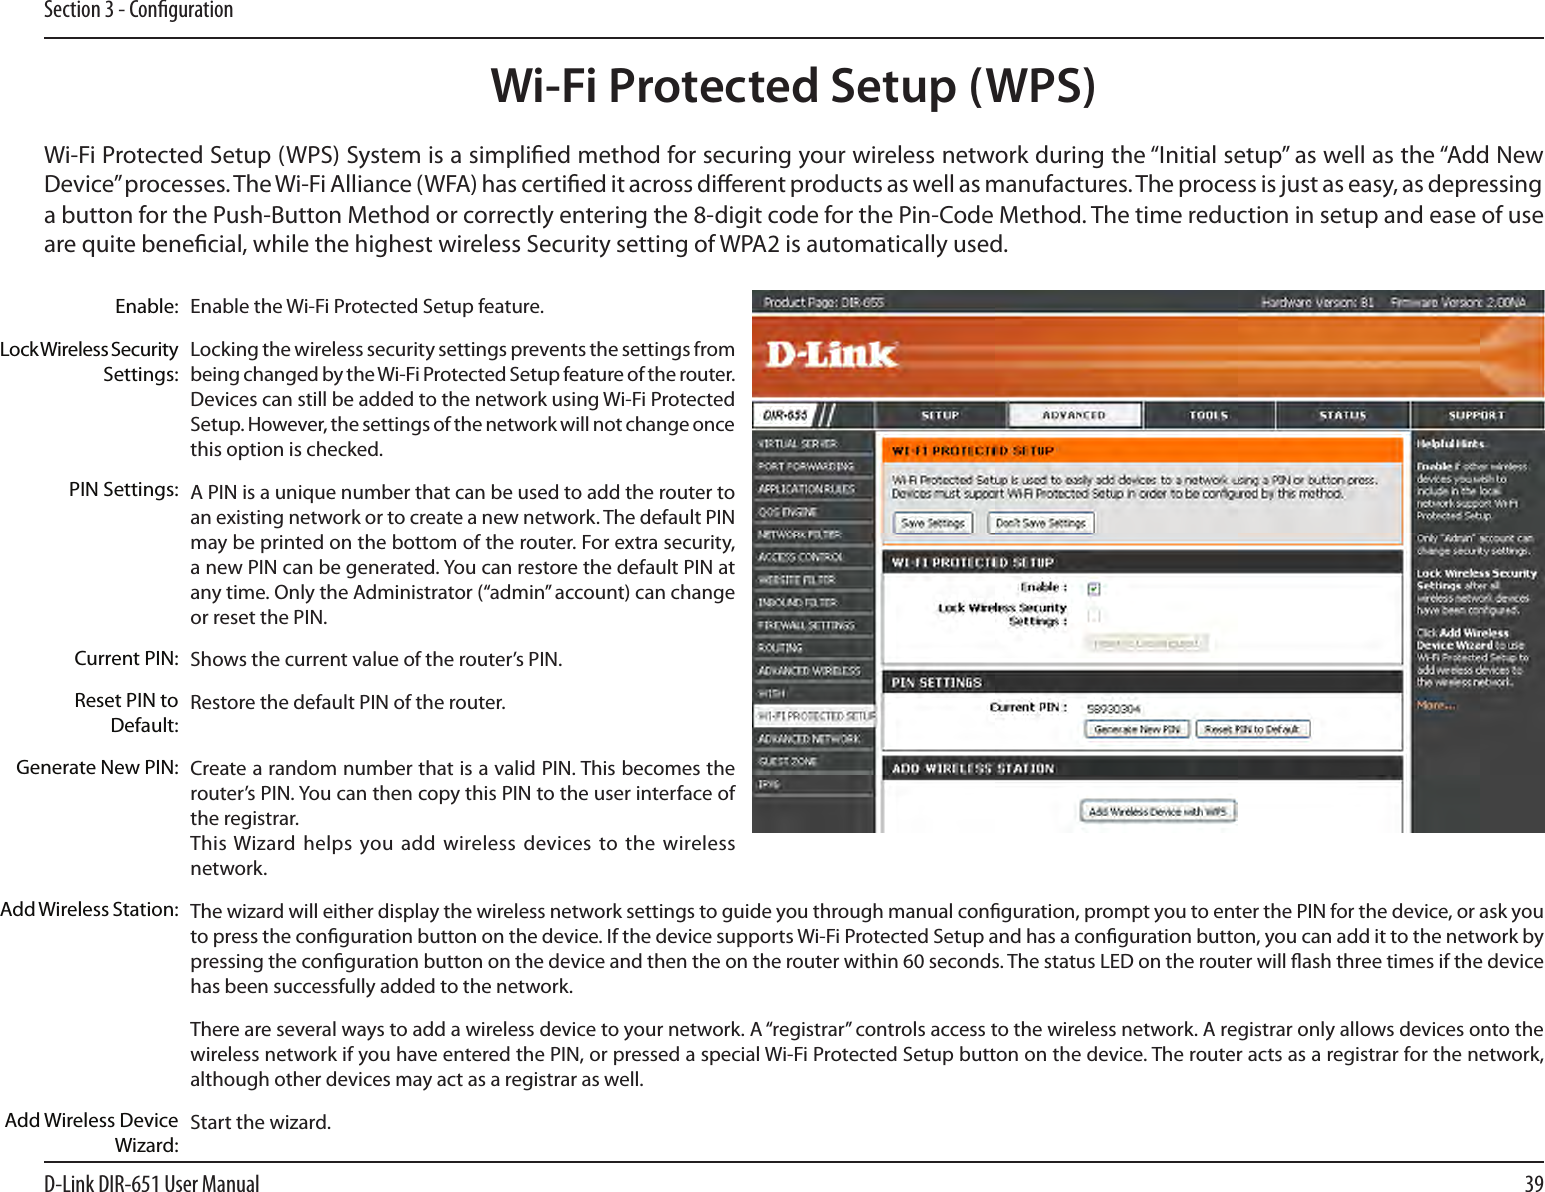 39D-Link DIR-651 User ManualSection 3 - CongurationWi-Fi Protected Setup (WPS)Enable the Wi-Fi Protected Setup feature. Locking the wireless security settings prevents the settings from being changed by the Wi-Fi Protected Setup feature of the router. Devices can still be added to the network using Wi-Fi Protected Setup. However, the settings of the network will not change once this option is checked.A PIN is a unique number that can be used to add the router to an existing network or to create a new network. The default PIN may be printed on the bottom of the router. For extra security, a new PIN can be generated. You can restore the default PIN at any time. Only the Administrator (“admin” account) can change or reset the PIN. Shows the current value of the router’s PIN. Restore the default PIN of the router. Create a random number that is a valid PIN. This becomes the router’s PIN. You can then copy this PIN to the user interface of the registrar.This Wizard helps you  add wireless devices to  the wireless network.The wizard will either display the wireless network settings to guide you through manual conguration, prompt you to enter the PIN for the device, or ask you to press the conguration button on the device. If the device supports Wi-Fi Protected Setup and has a conguration button, you can add it to the network by pressing the conguration button on the device and then the on the router within 60 seconds. The status LED on the router will ash three times if the device has been successfully added to the network.There are several ways to add a wireless device to your network. A “registrar” controls access to the wireless network. A registrar only allows devices onto the wireless network if you have entered the PIN, or pressed a special Wi-Fi Protected Setup button on the device. The router acts as a registrar for the network, although other devices may act as a registrar as well.Start the wizard.Enable:Lock Wireless Security Settings:PIN Settings:Current PIN:Reset PIN to Default:Generate New PIN:Add Wireless Station:Add Wireless Device Wizard:Wi-Fi Protected Setup (WPS) System is a simplied method for securing your wireless network during the “Initial setup” as well as the “Add New Device” processes. The Wi-Fi Alliance (WFA) has certied it across dierent products as well as manufactures. The process is just as easy, as depressing a button for the Push-Button Method or correctly entering the 8-digit code for the Pin-Code Method. The time reduction in setup and ease of use are quite benecial, while the highest wireless Security setting of WPA2 is automatically used.